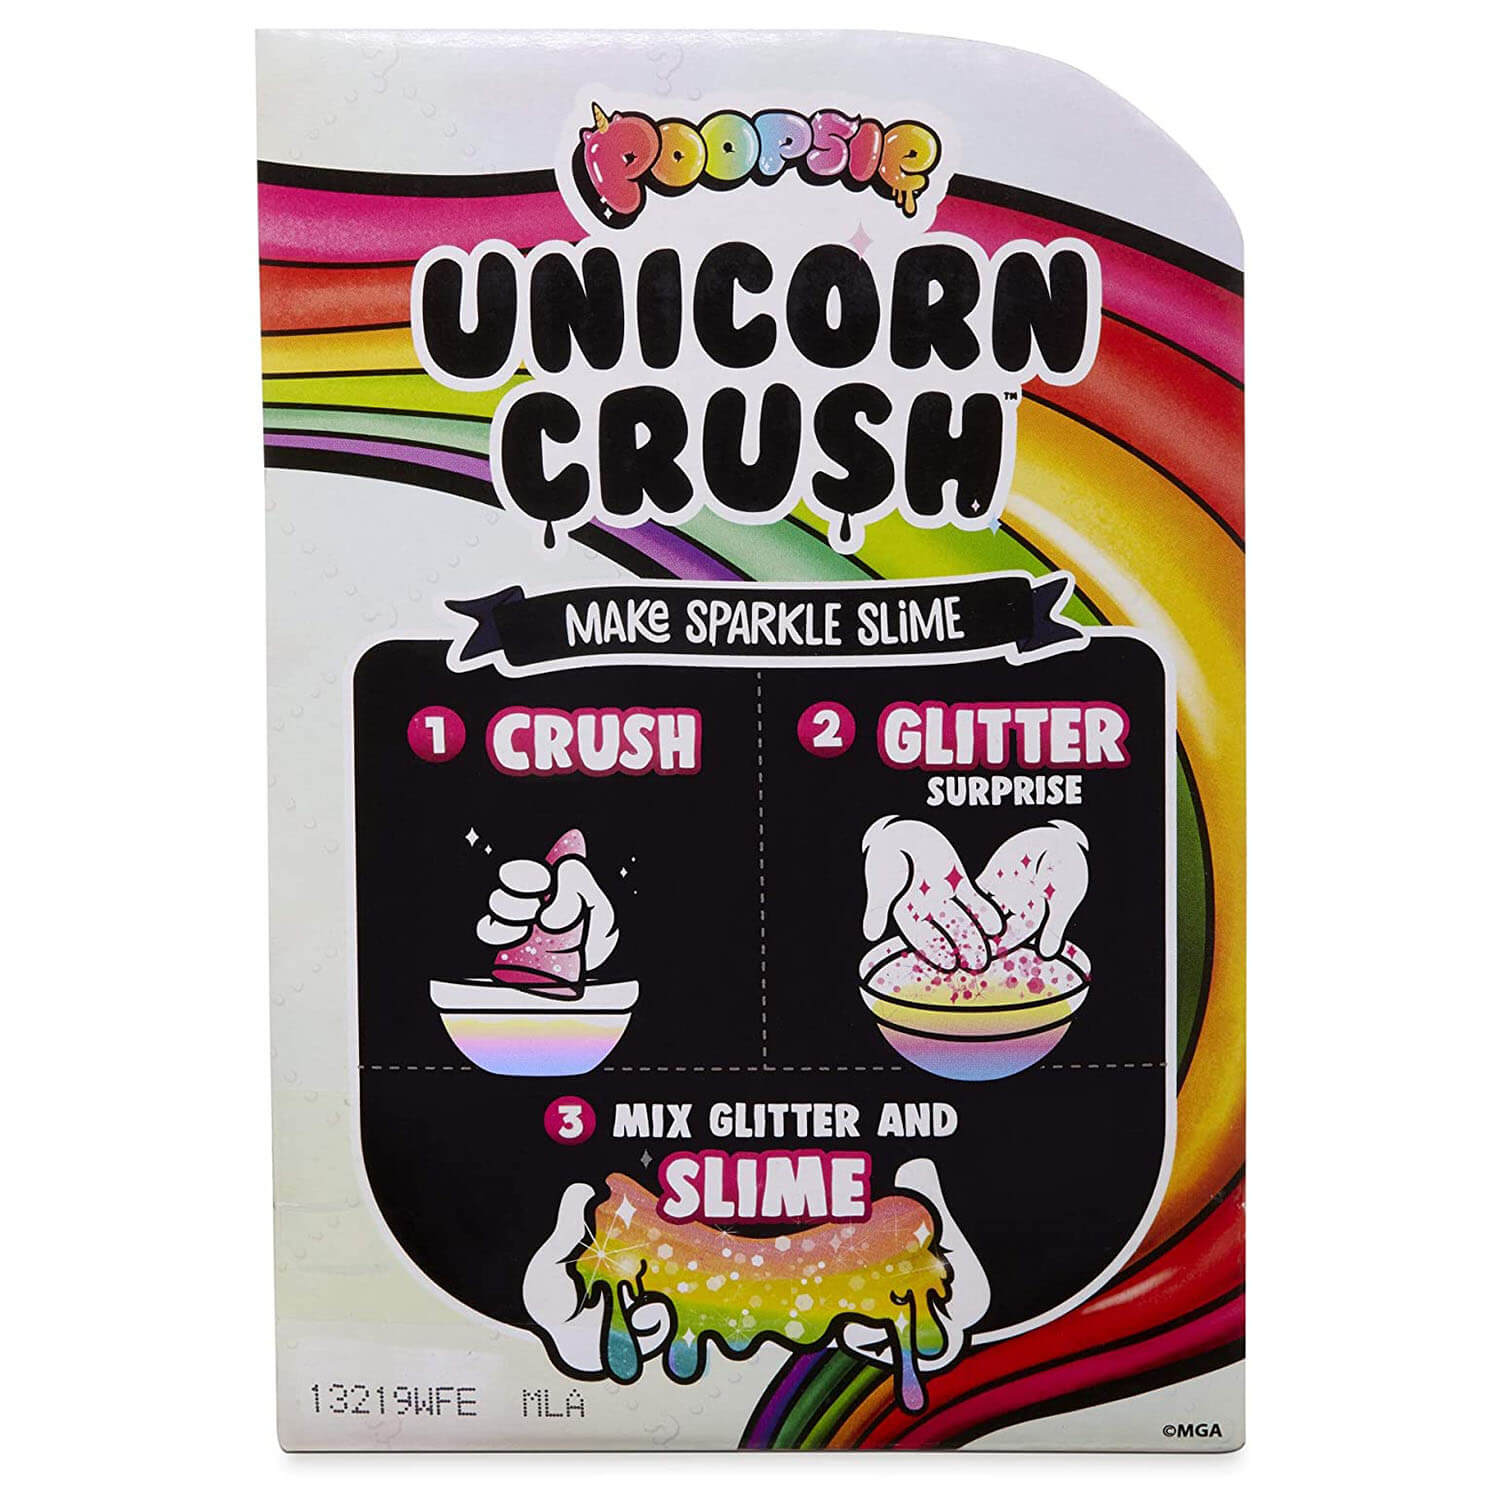 Back view of the Poopsie Unicorn Crush package.